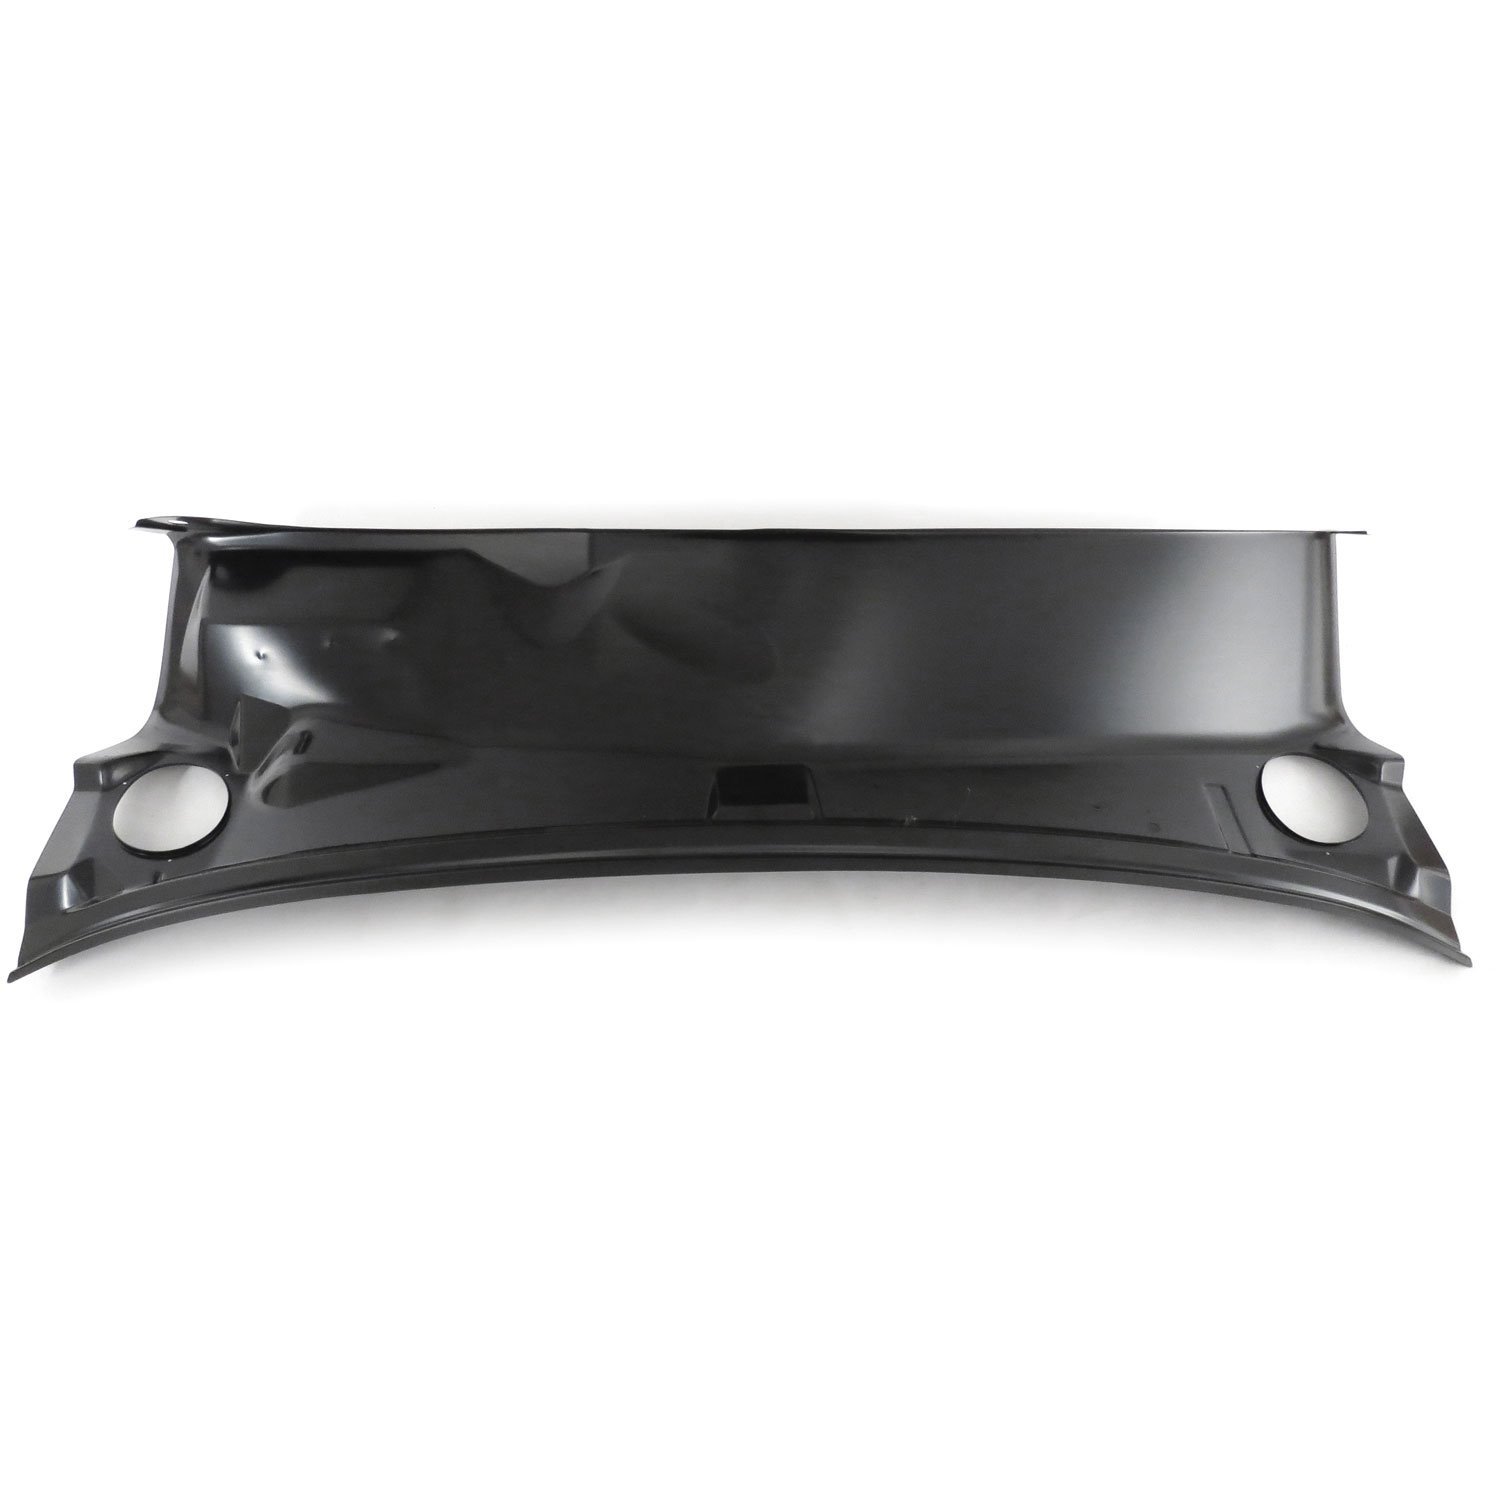 CP01-691C Lower Cowl Panel 1969 Pontiac Firebird Without Air Conditioning